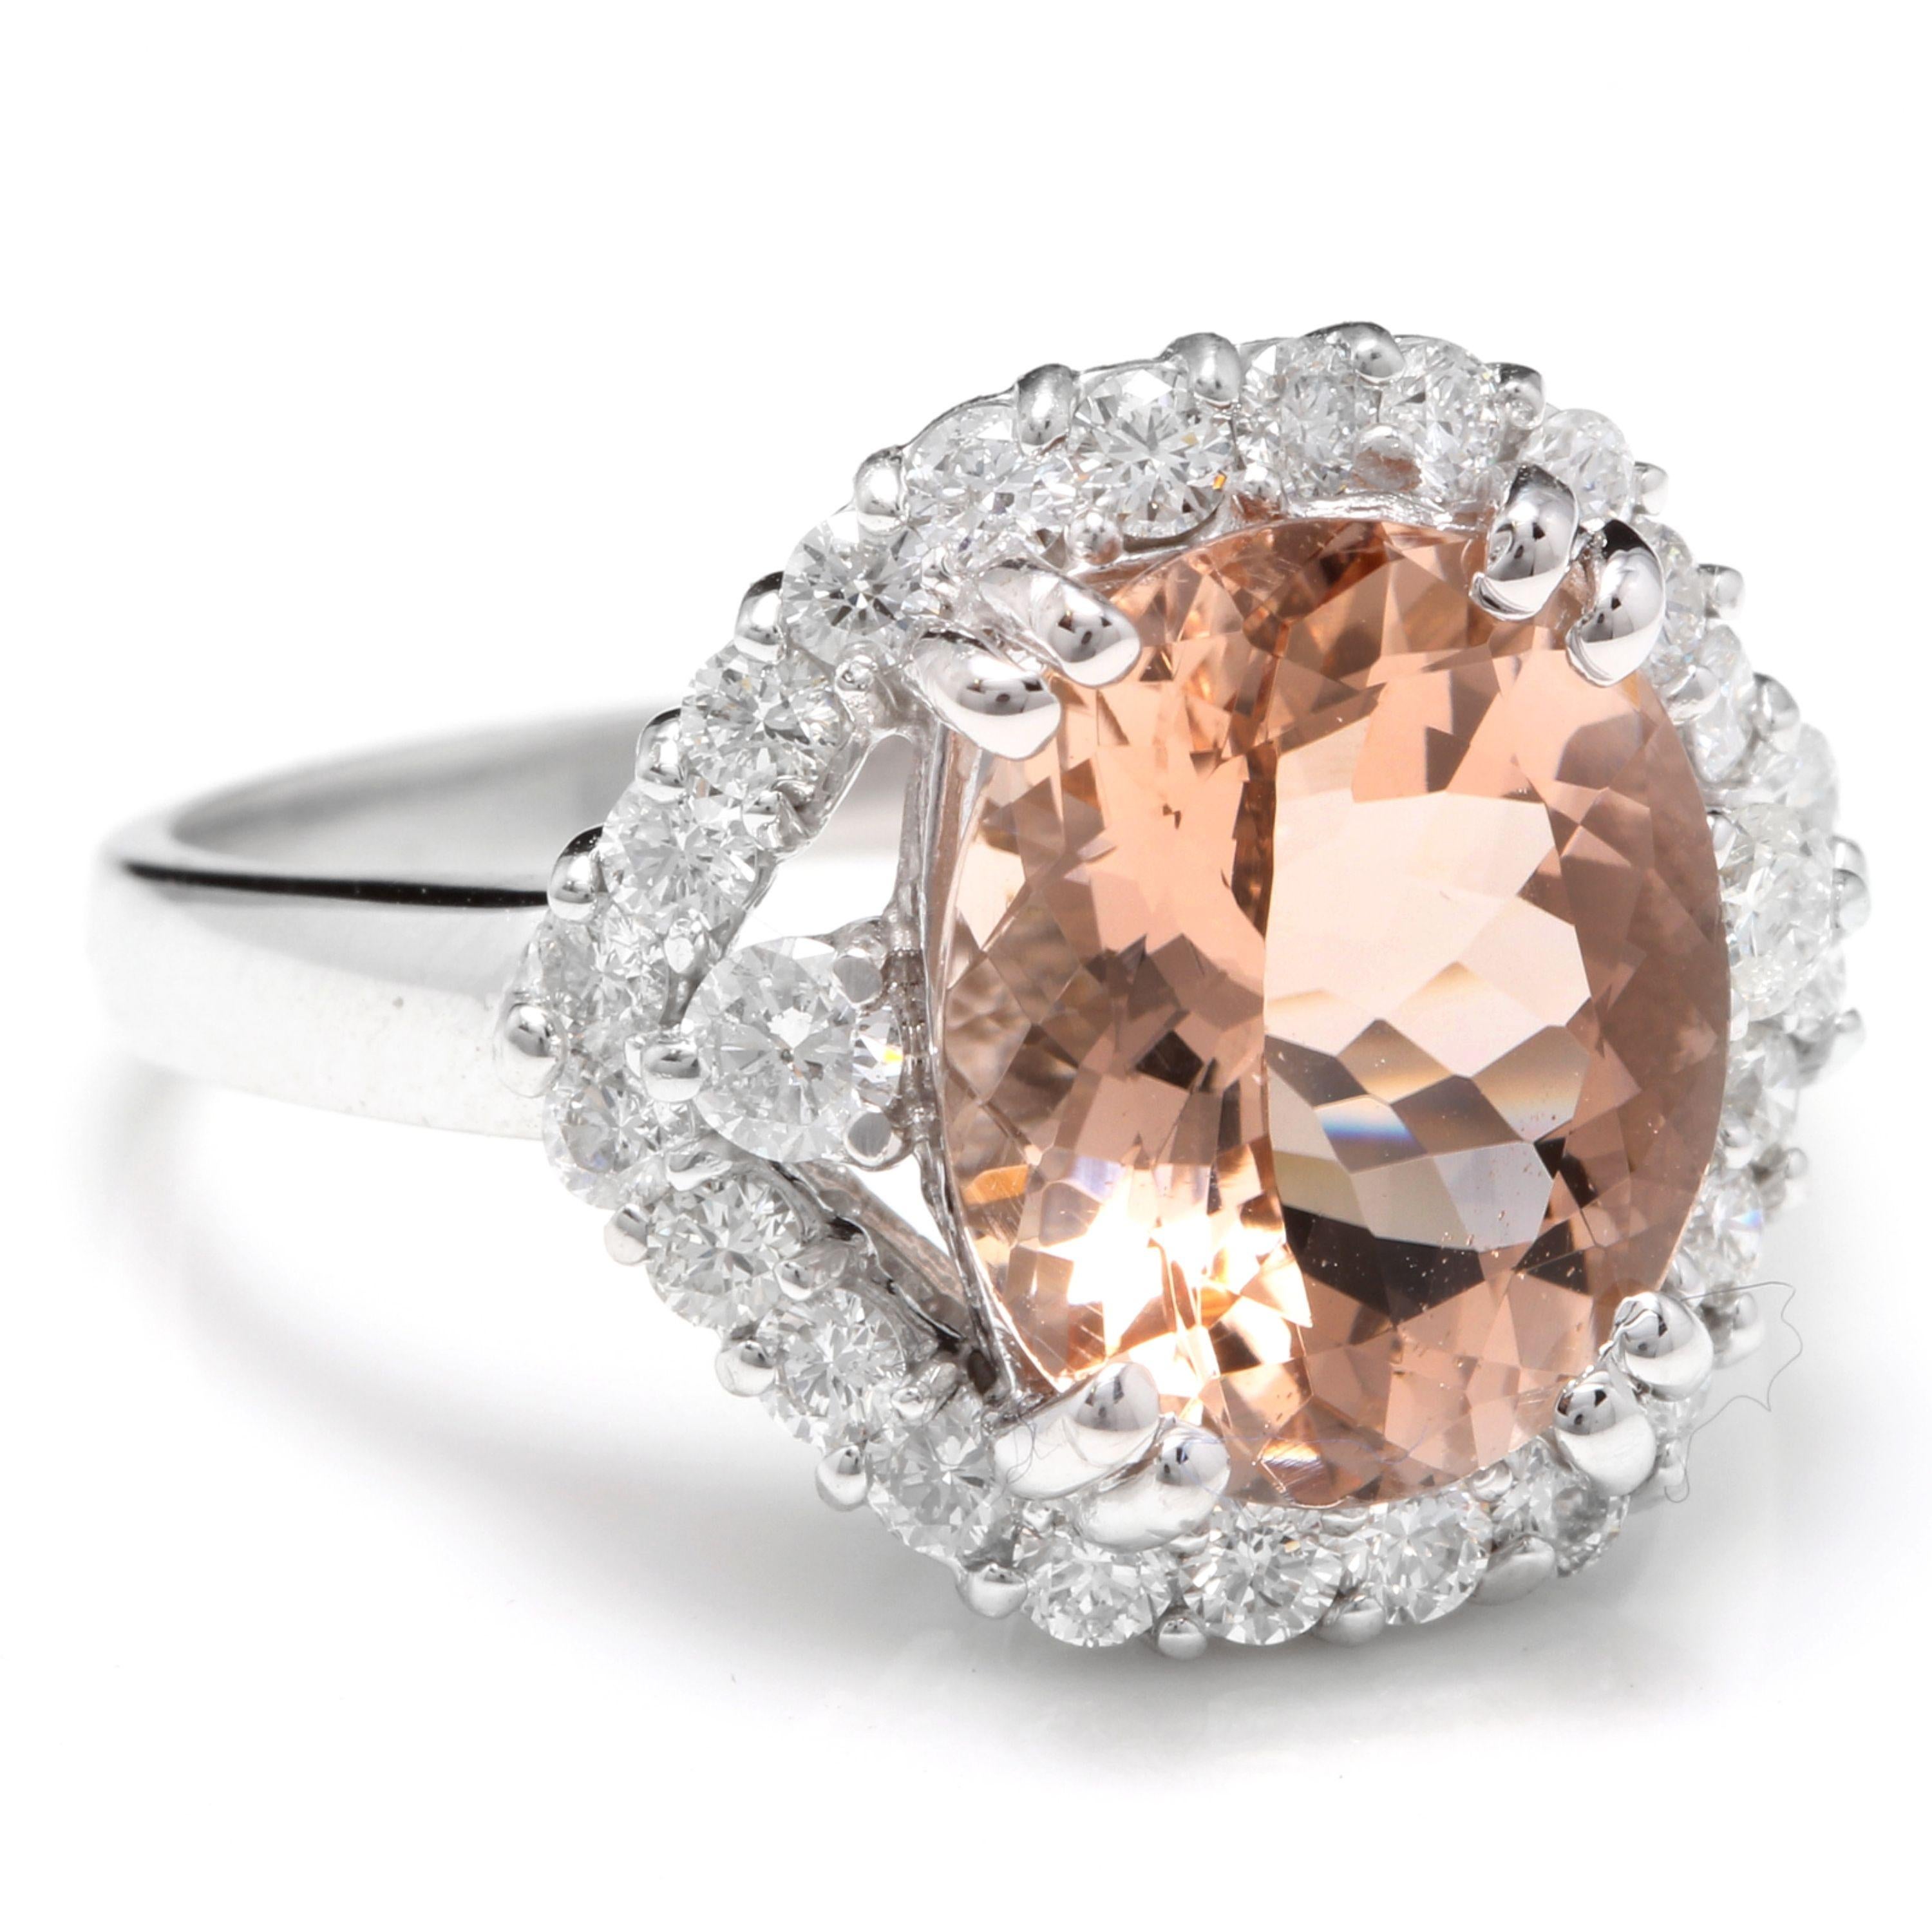 5.75 Carats Exquisite Natural Morganite and Diamond 14K Solid White Gold Ring

Total Natural Oval Shaped Morganite Weights: Approx. 5.00 Carats

Morganite Measures: Approx. 12.00 x 10.00mm

Natural Round Diamonds Weight: Approx. 0.75 Carats (color